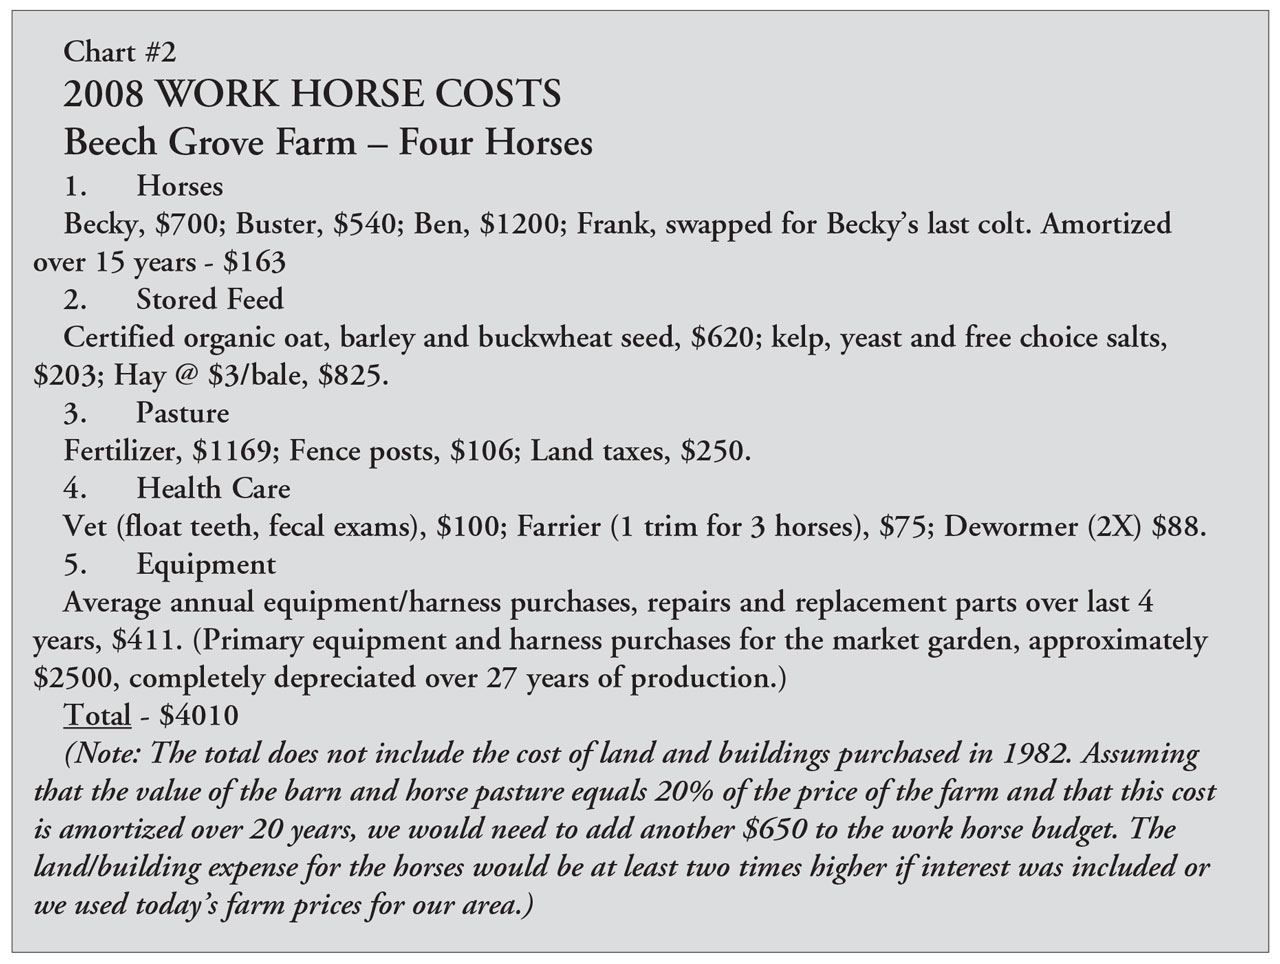 Cultivating Questions The Costs of Farming with Horses vs Tractors